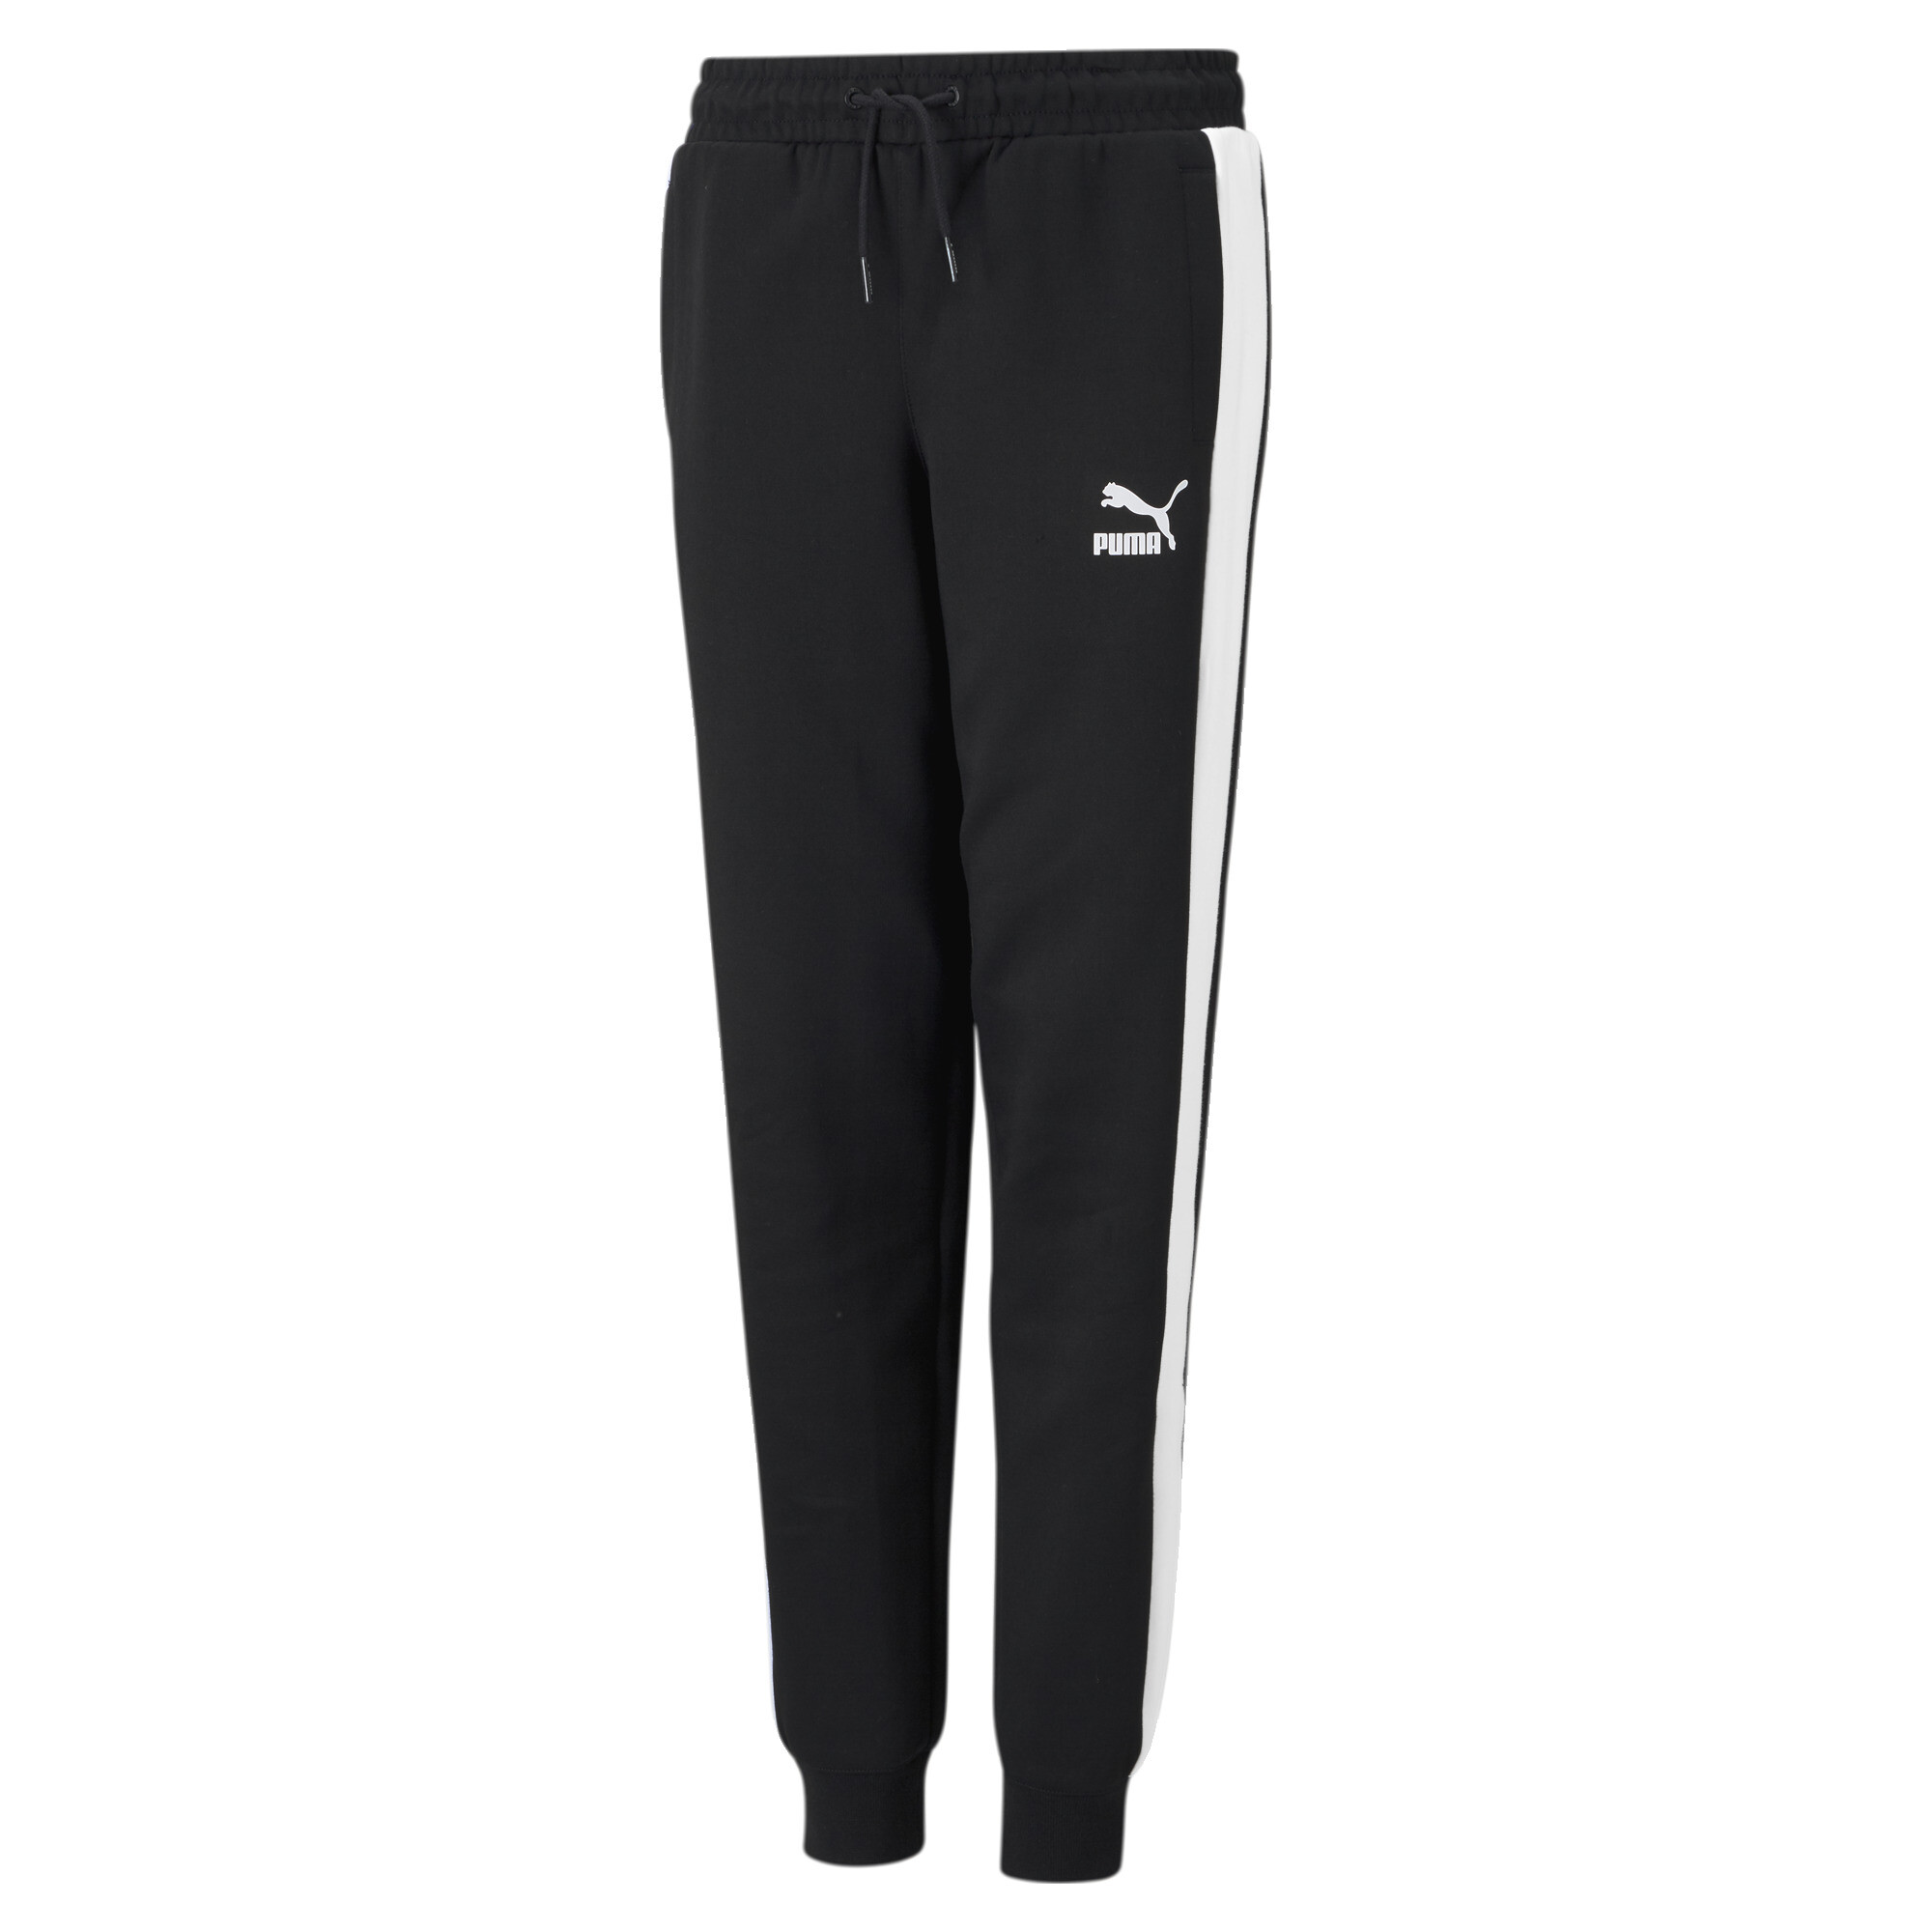 PUMA Iconic T7 Track Pants In 10 - Black, Size 5-6 Youth